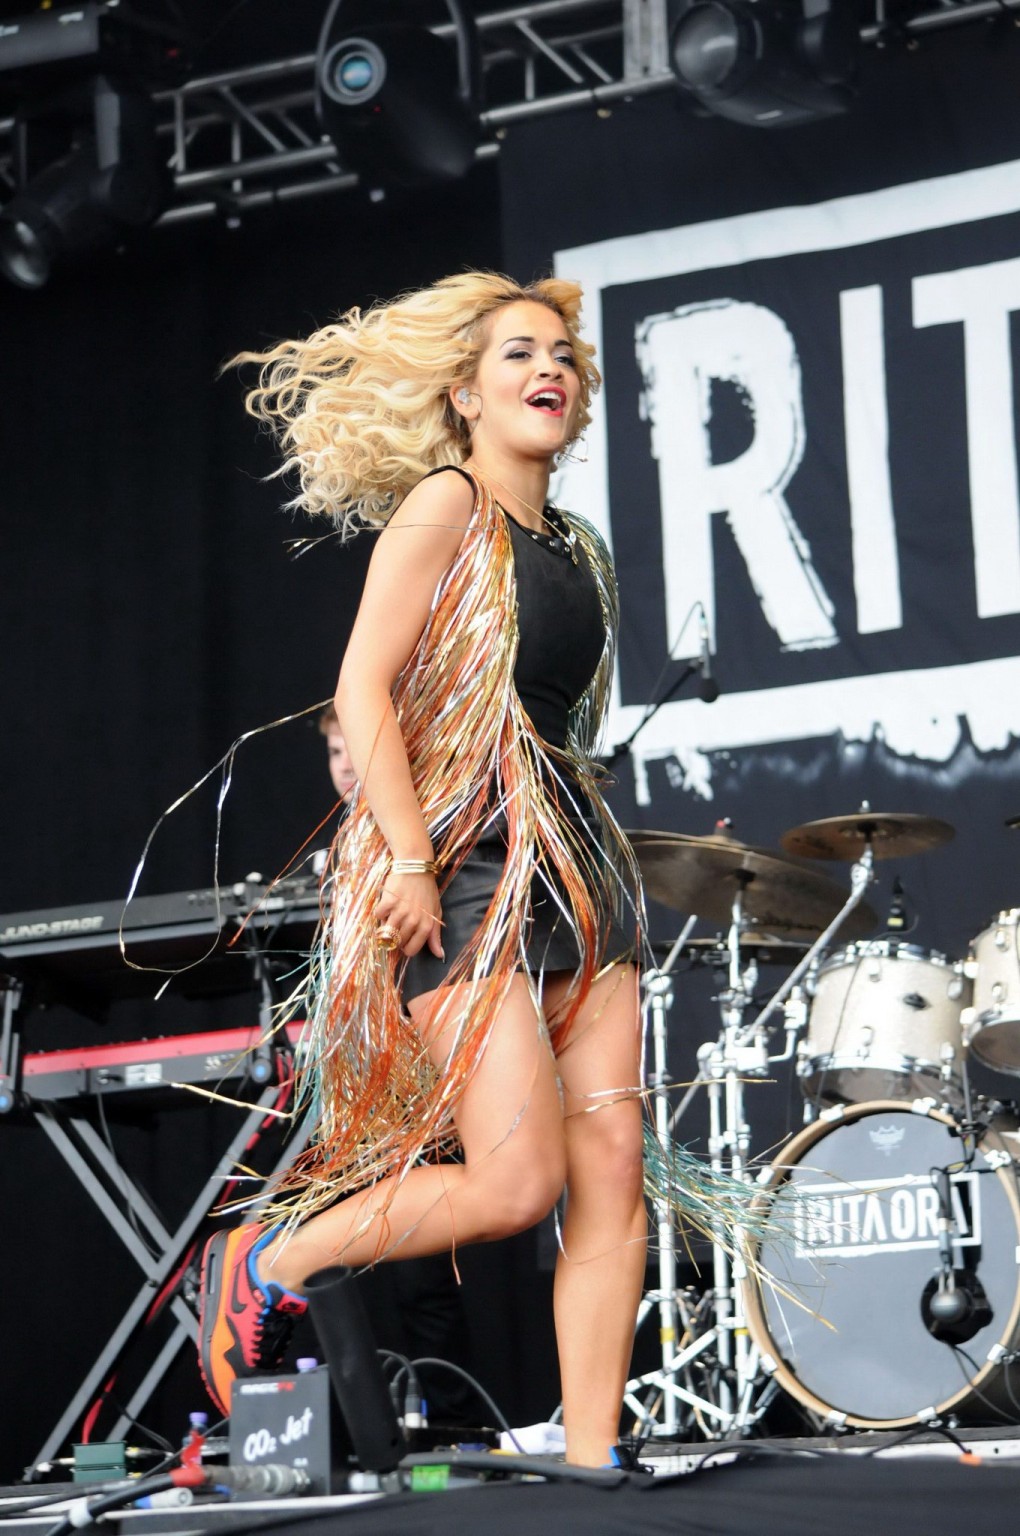 Rita Ora upskirt while performing at 'T in the Park #75257722